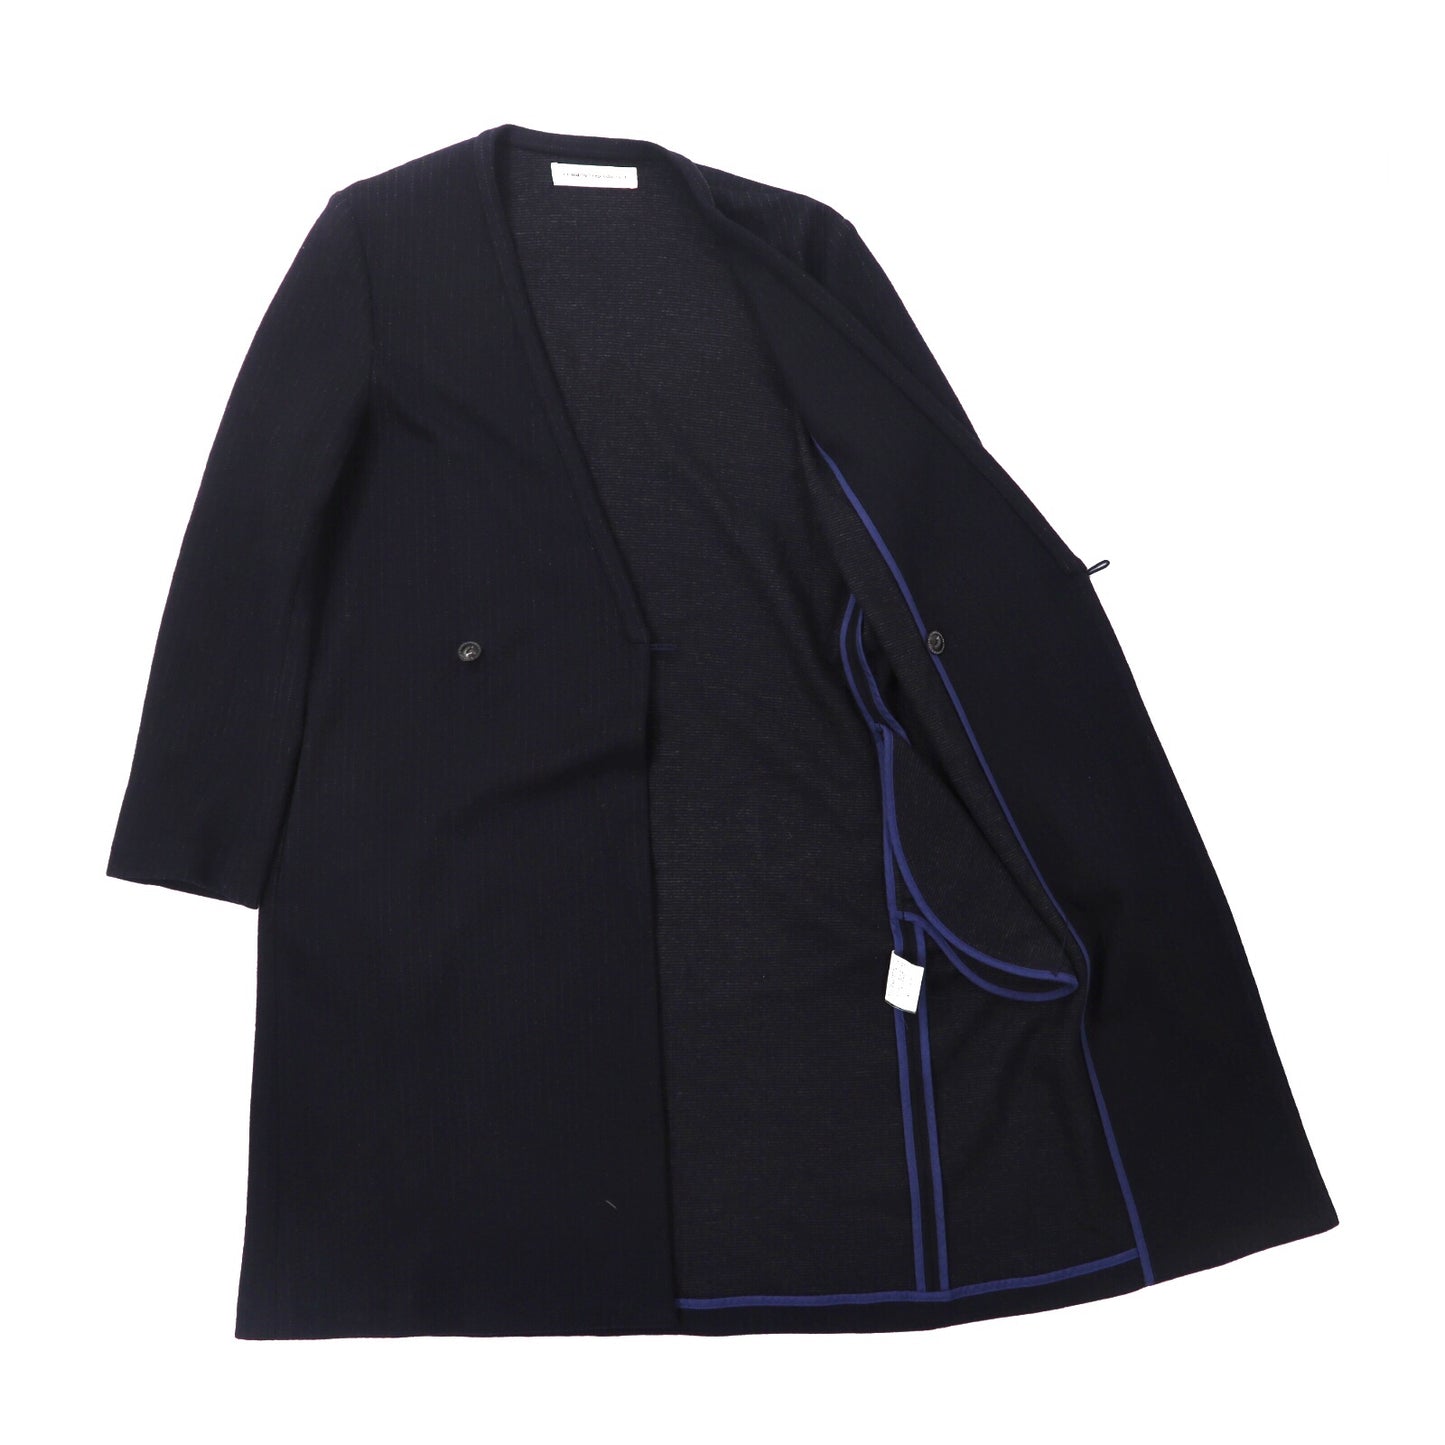 Commono Reproduct Double Chester coat 1 Navy Striped Wool Made in 